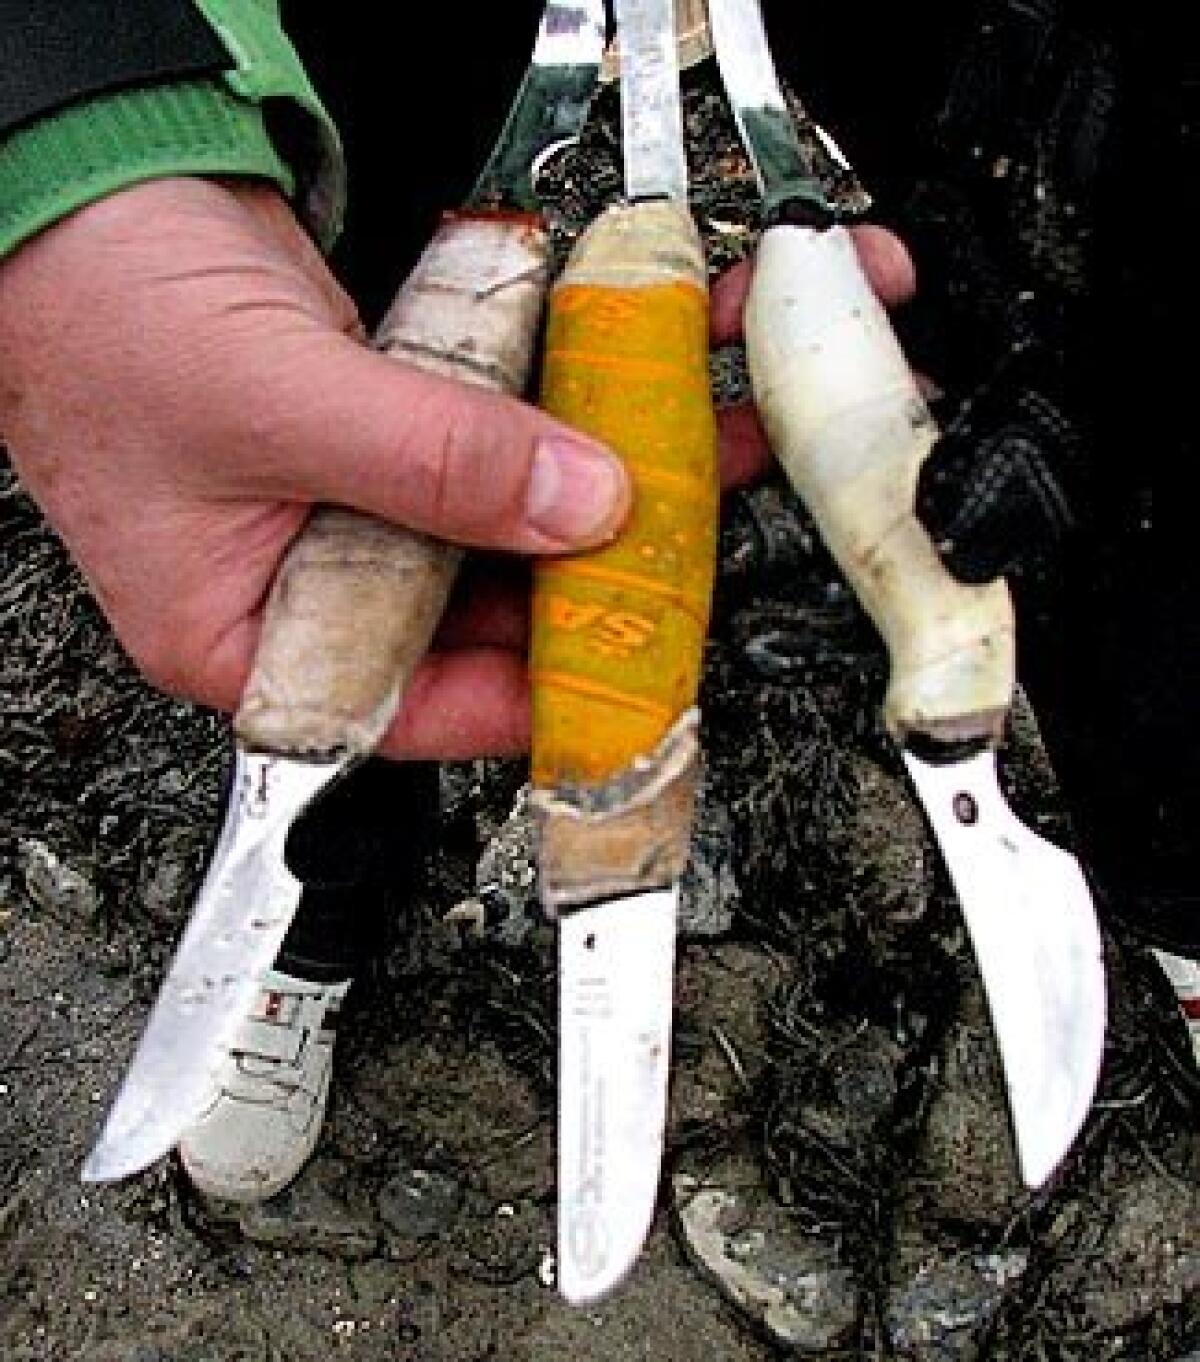 Heini Petersen of Norway displays his oyster shucking knives.